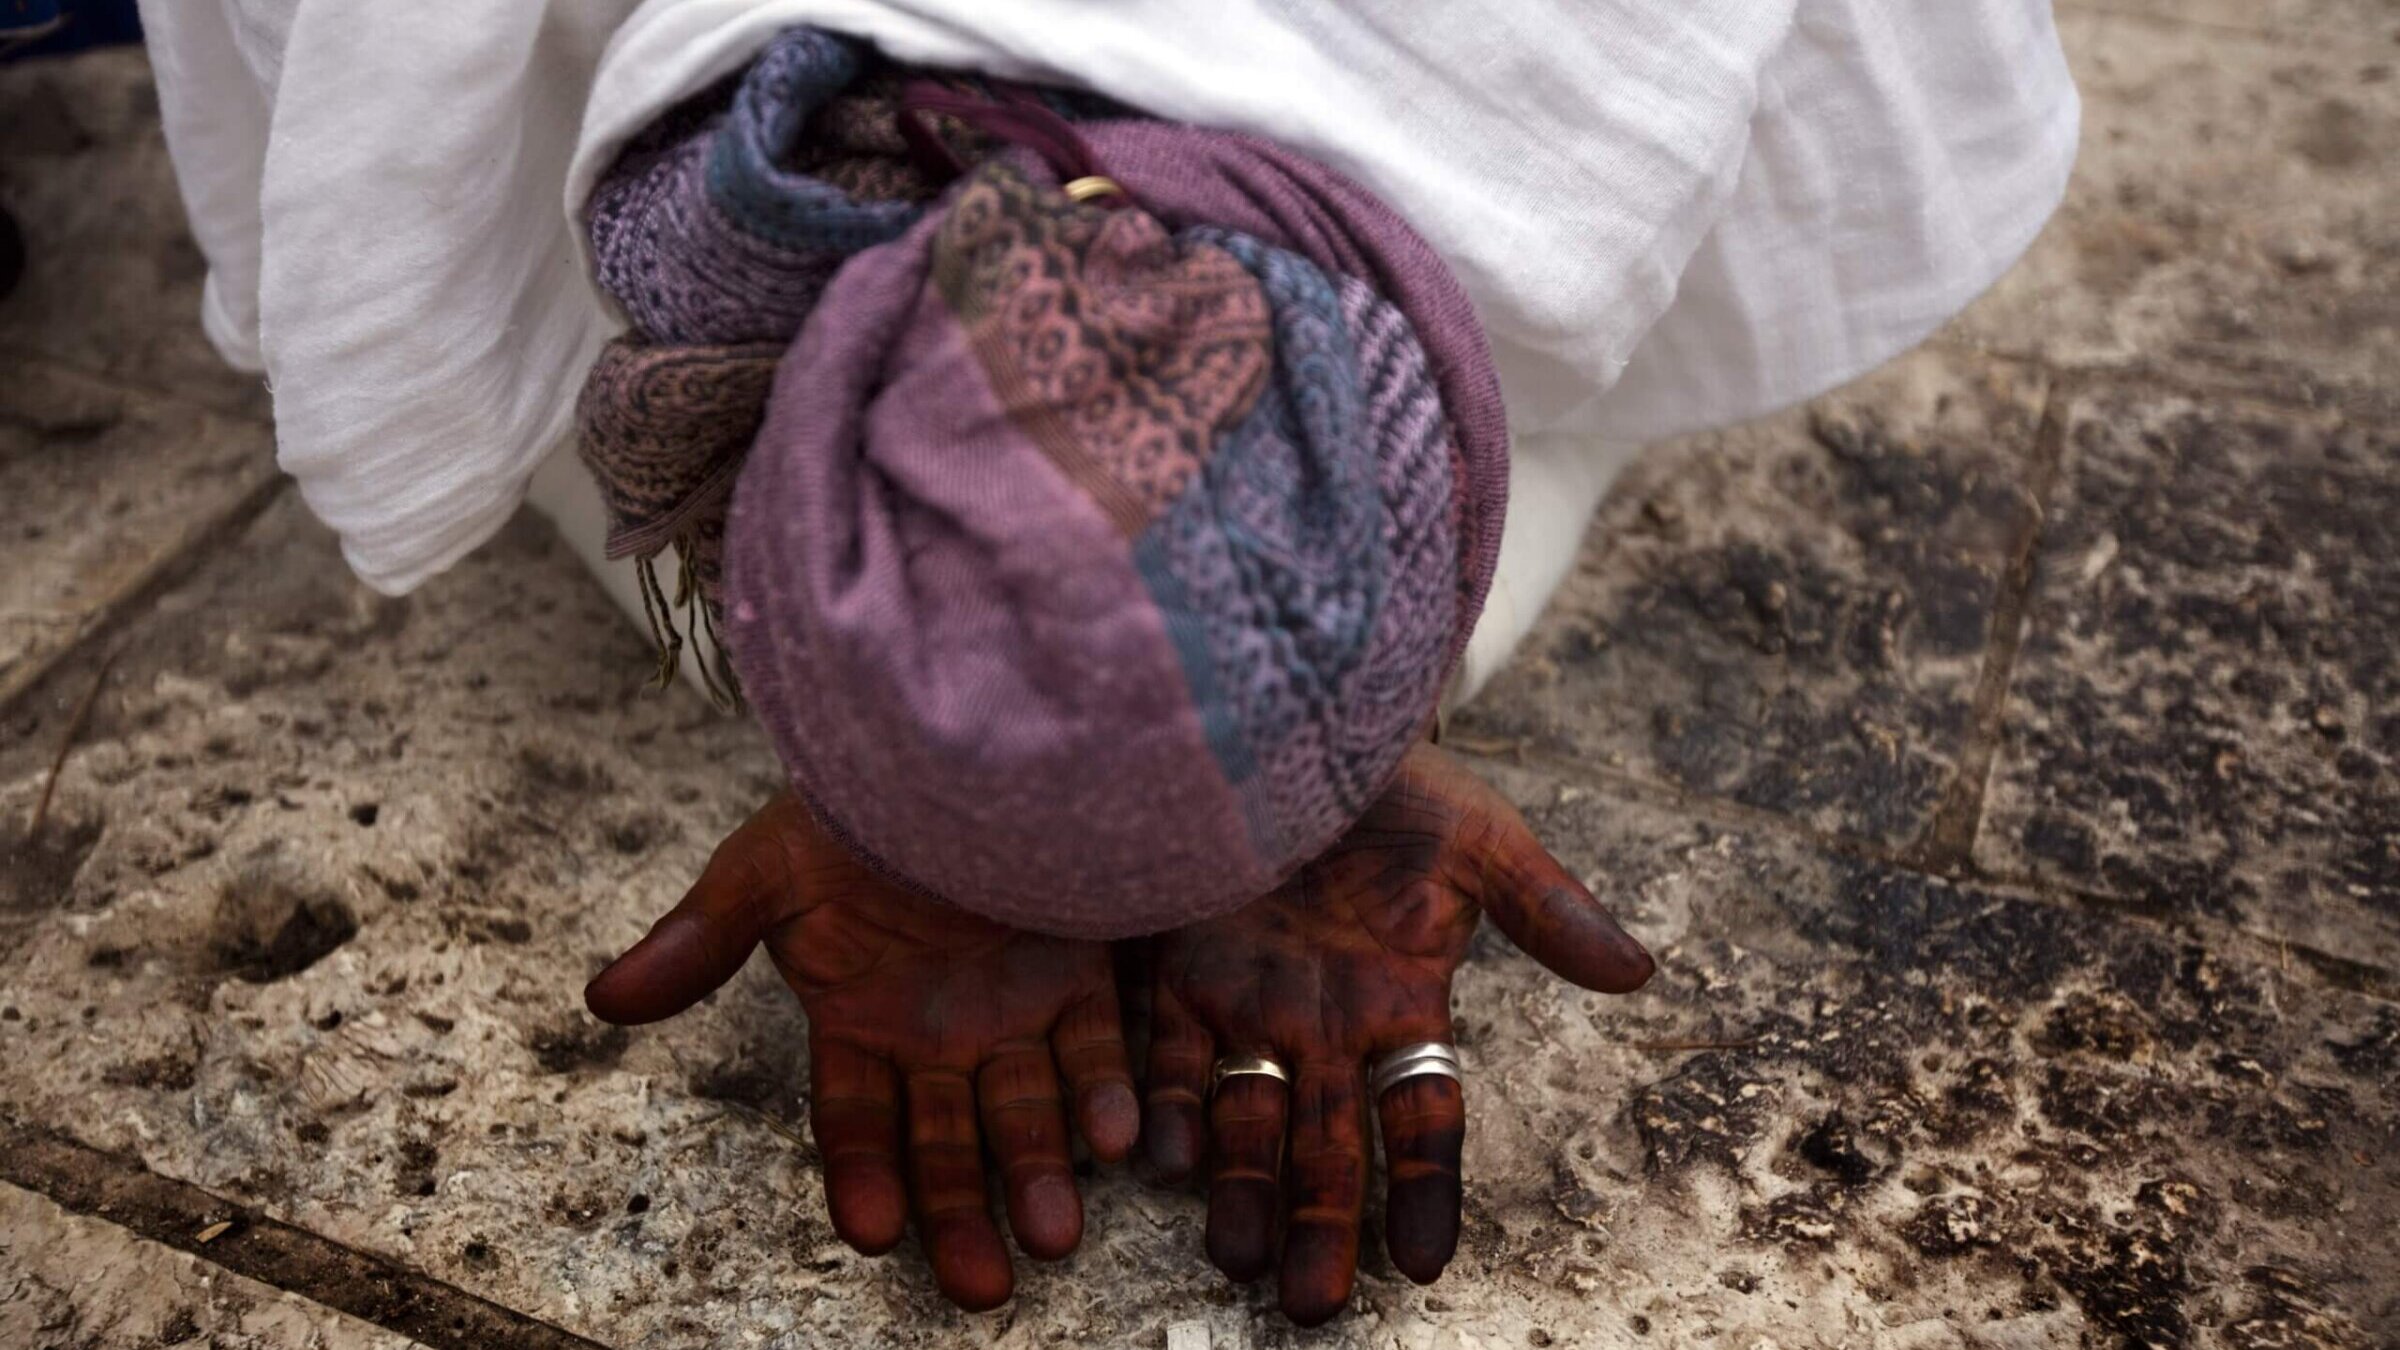 An Ethiopian Jewish women prays during the Sigd festival in Jerusalem on Nov. 16, 2009. Israel airlifted in 35,000 Ethiopian Jews under Operation Moses in 1984, at the height of a killer famine in the Horn of Africa, and during the 1991 Operation Solomon. Today, there are more than 120,000 Ethiopian Jews in Israel, 80,000 of whom were born in Africa.  